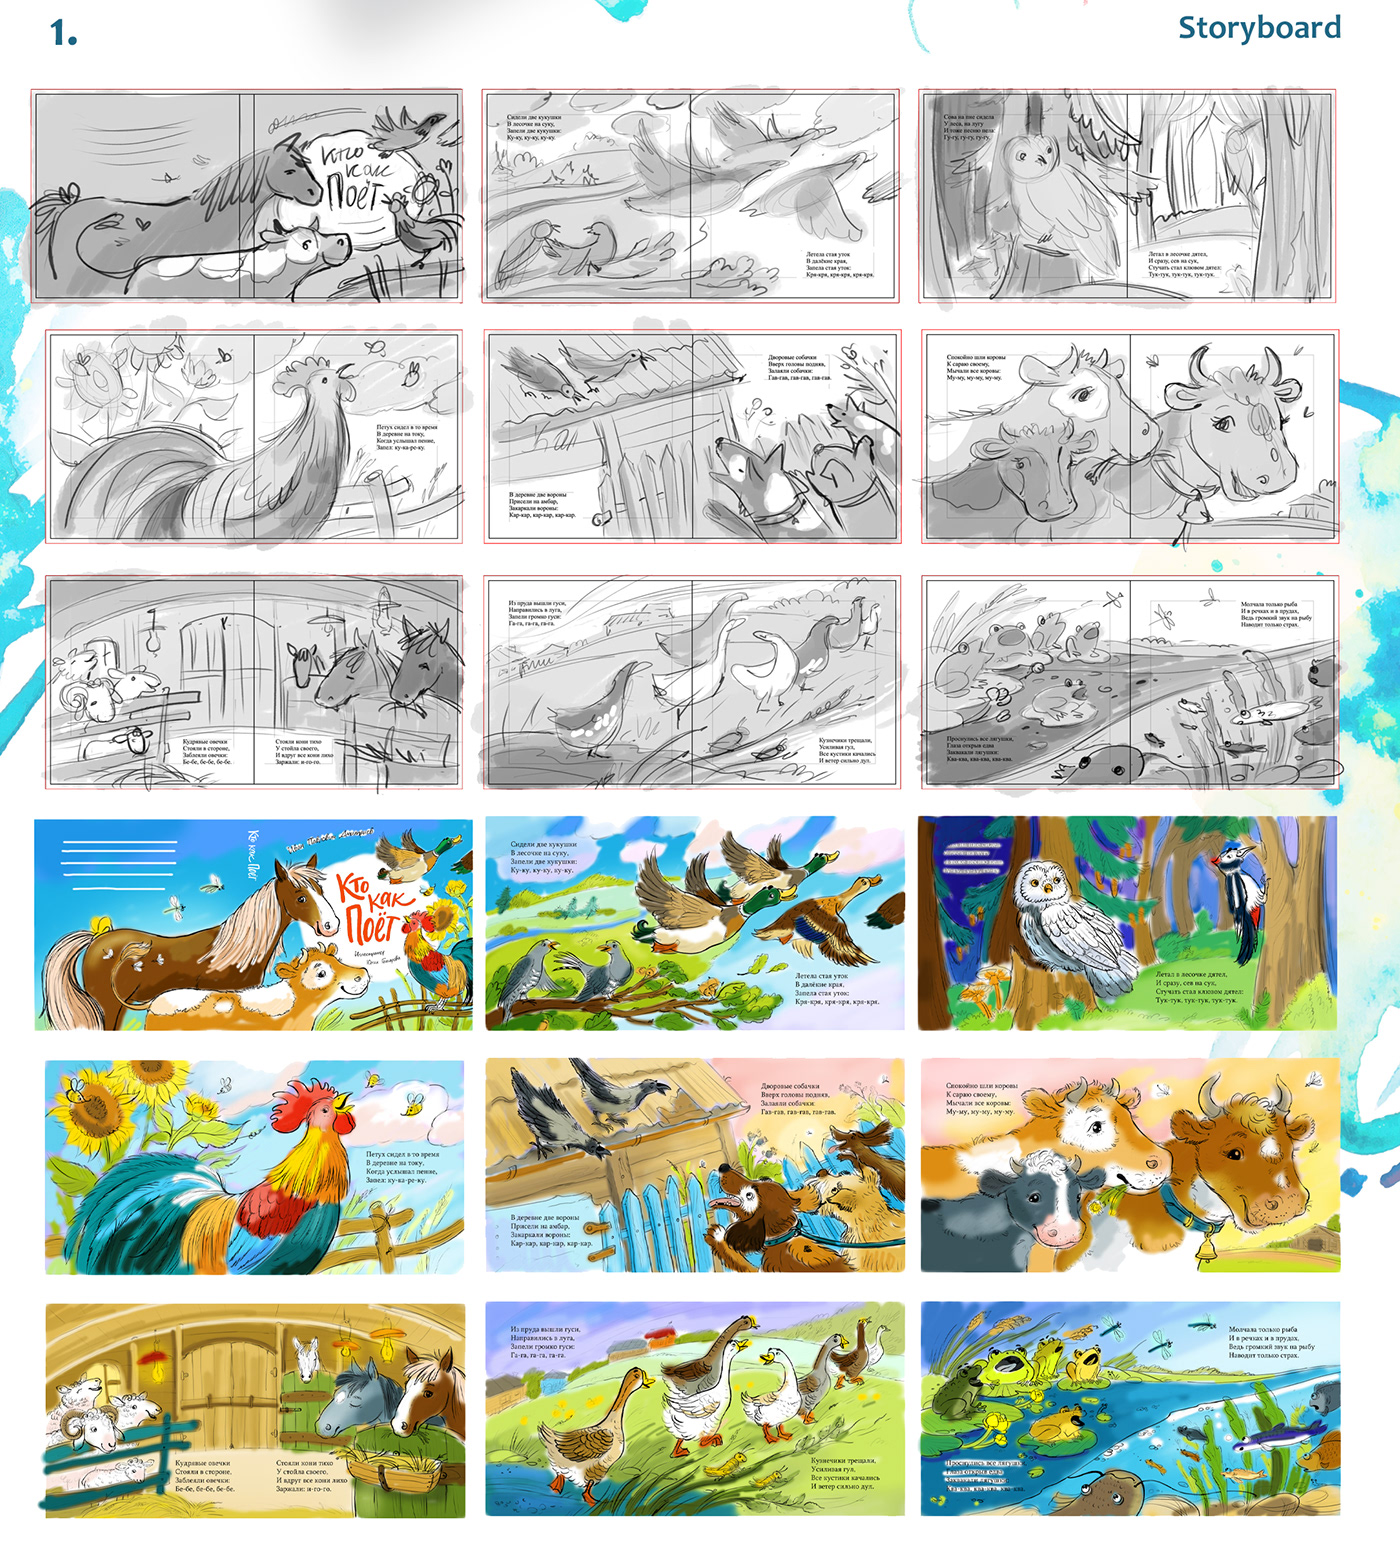 Illustrations for
the children's book "Animal sounds"